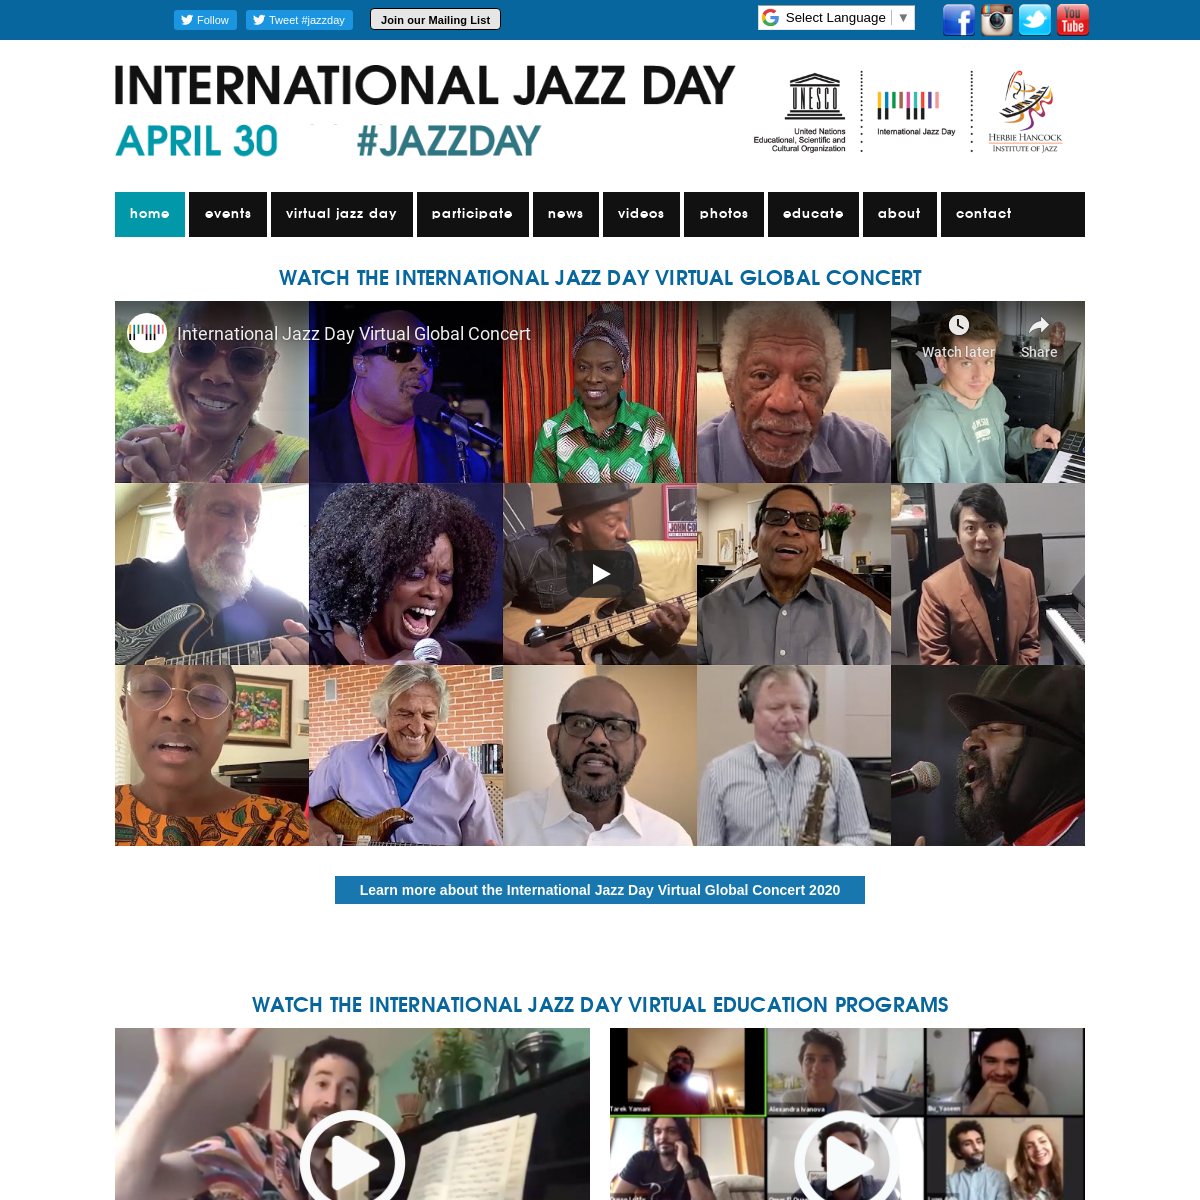 A complete backup of jazzday.com